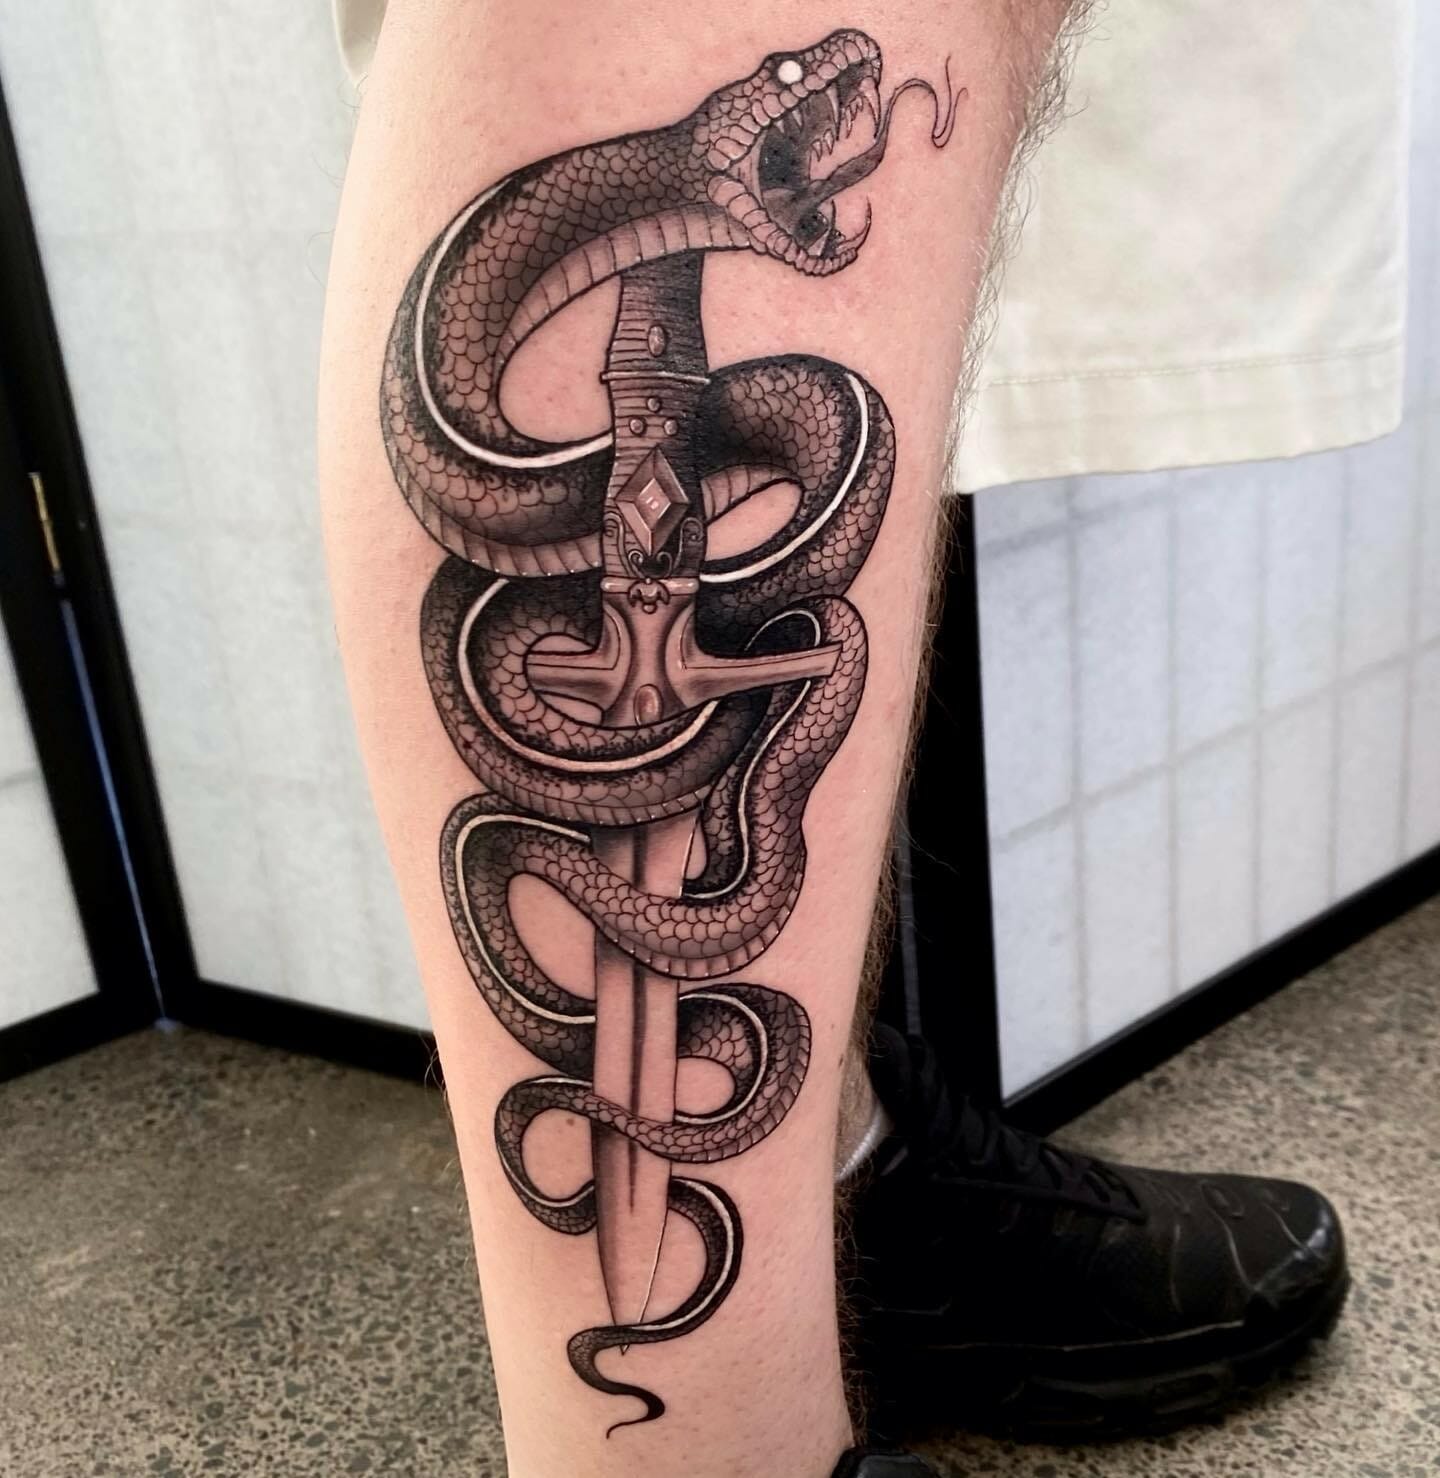 Snake tattoo by Victor Zetall | Post 26552